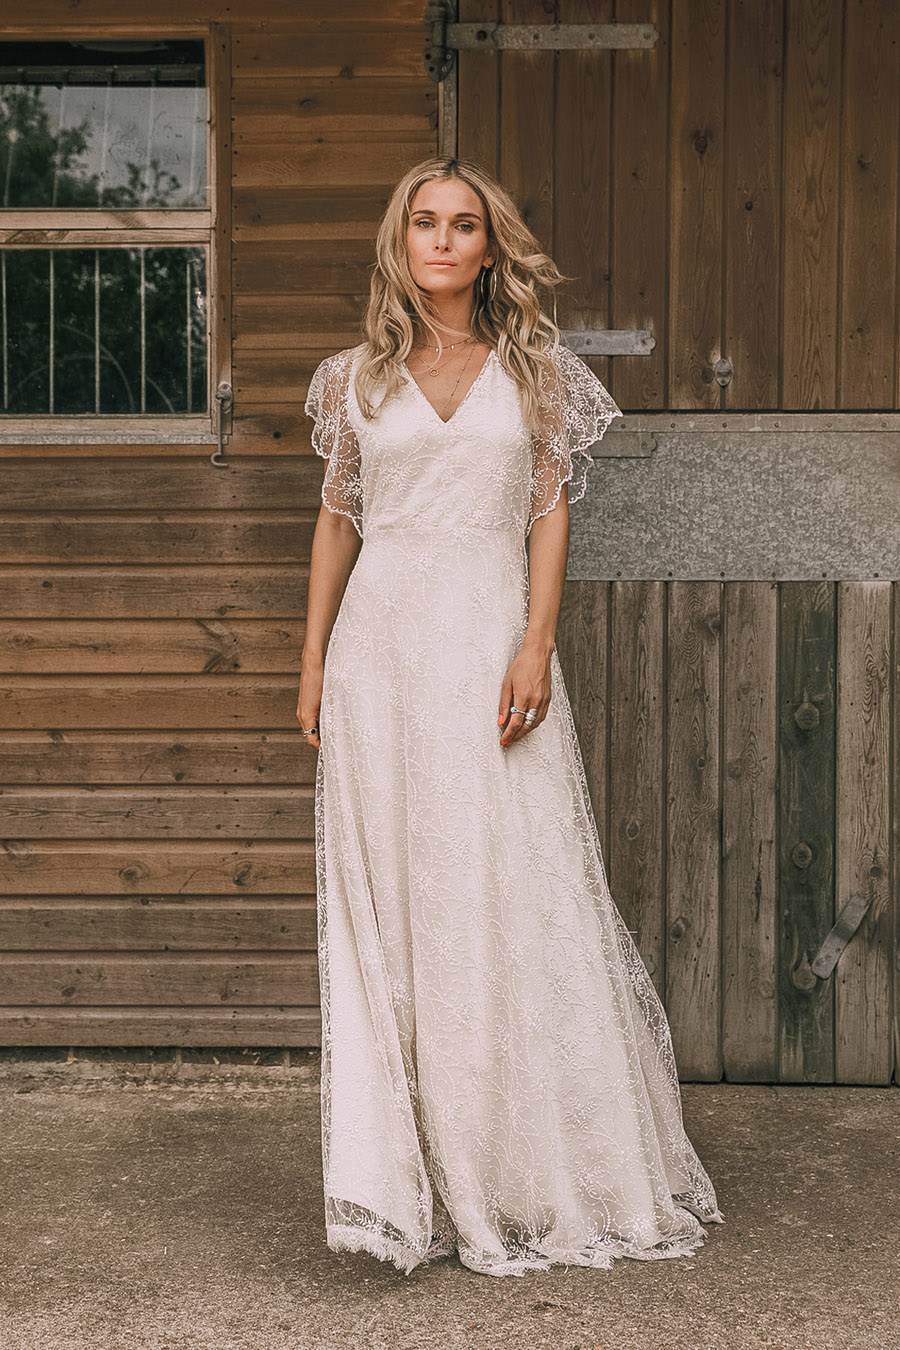 Belle and Bunty cowgirl wedding dress collection 2019 London (3)